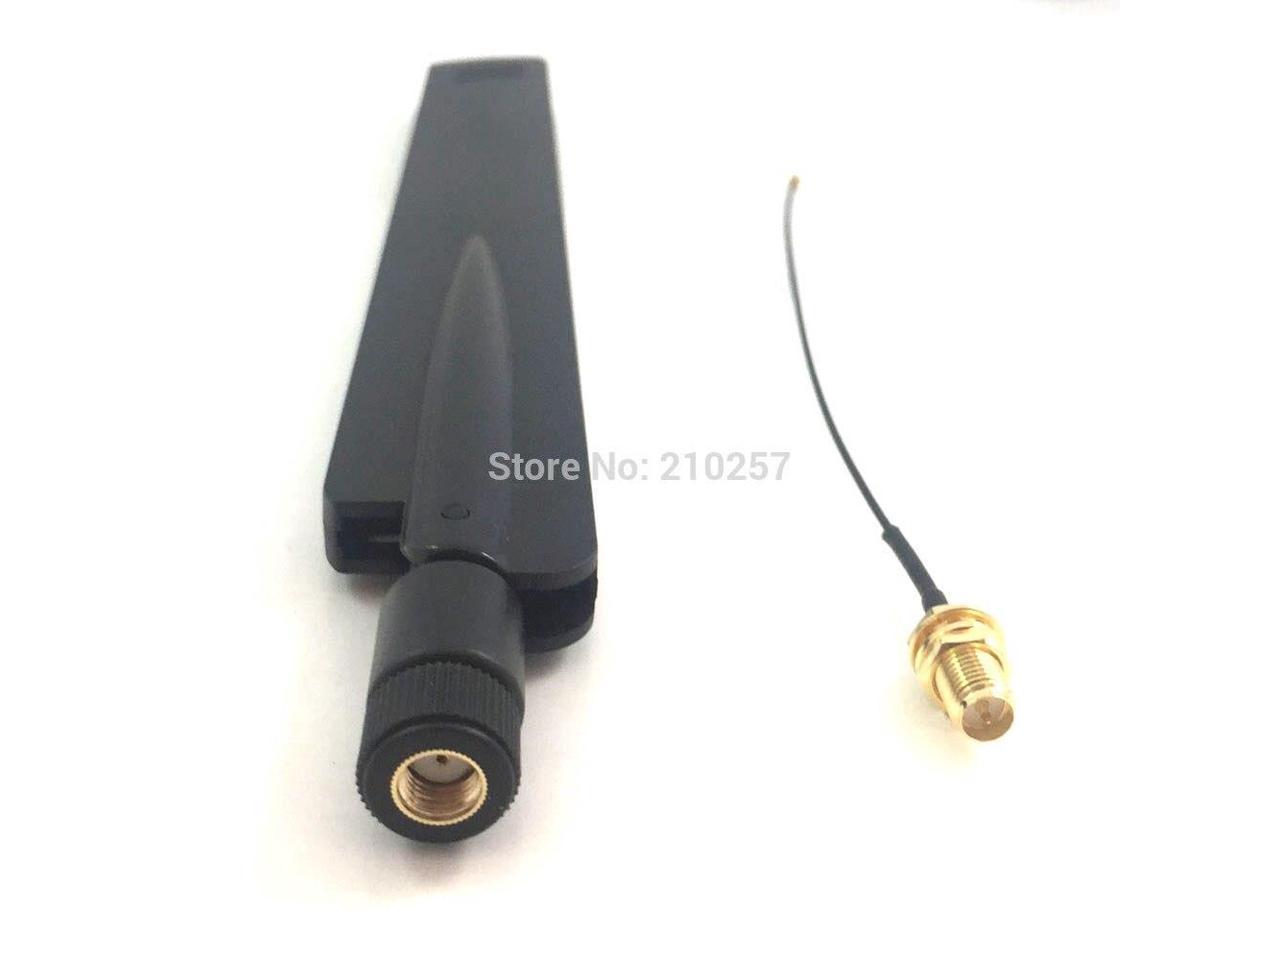 50pcs 2dBi Network Antenna RP-SMA 2.4GHz Wireless WiFi Booster Router Replace 